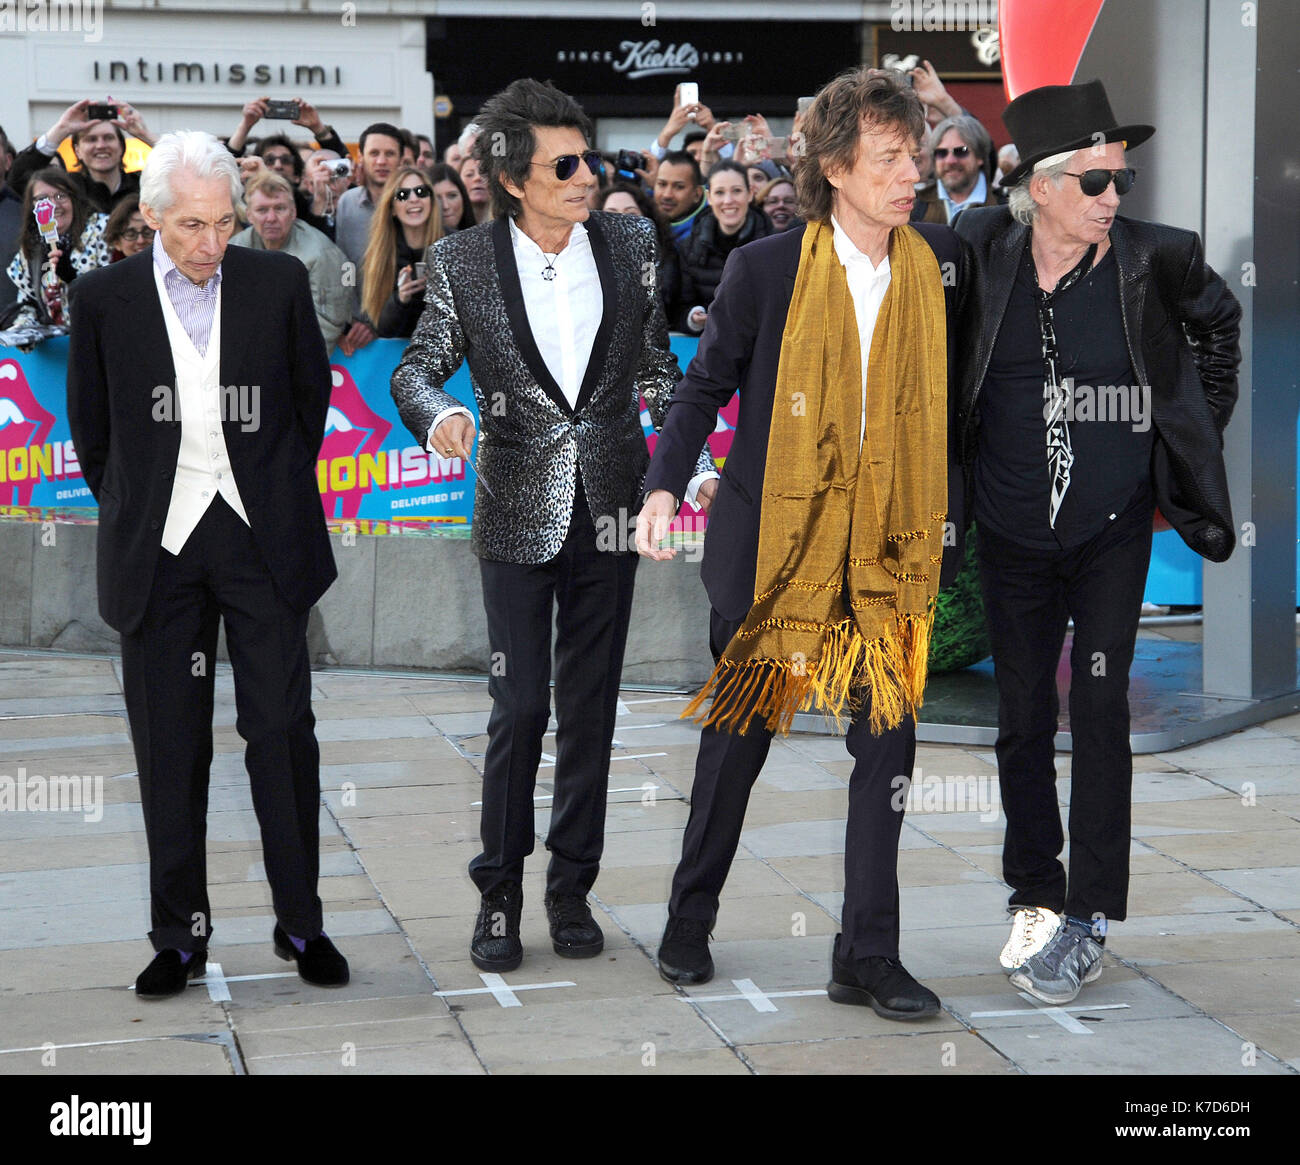 Photo Must Be Credited ©Alpha Press 078237 04/04/2016 Charlie Watts, Ronnie Wood, Mick Jagger and Keith Richards at The Rolling Stones Exhibitionism Private View Opening Night Gala held at the Saatchi Gallery in London. Stock Photo